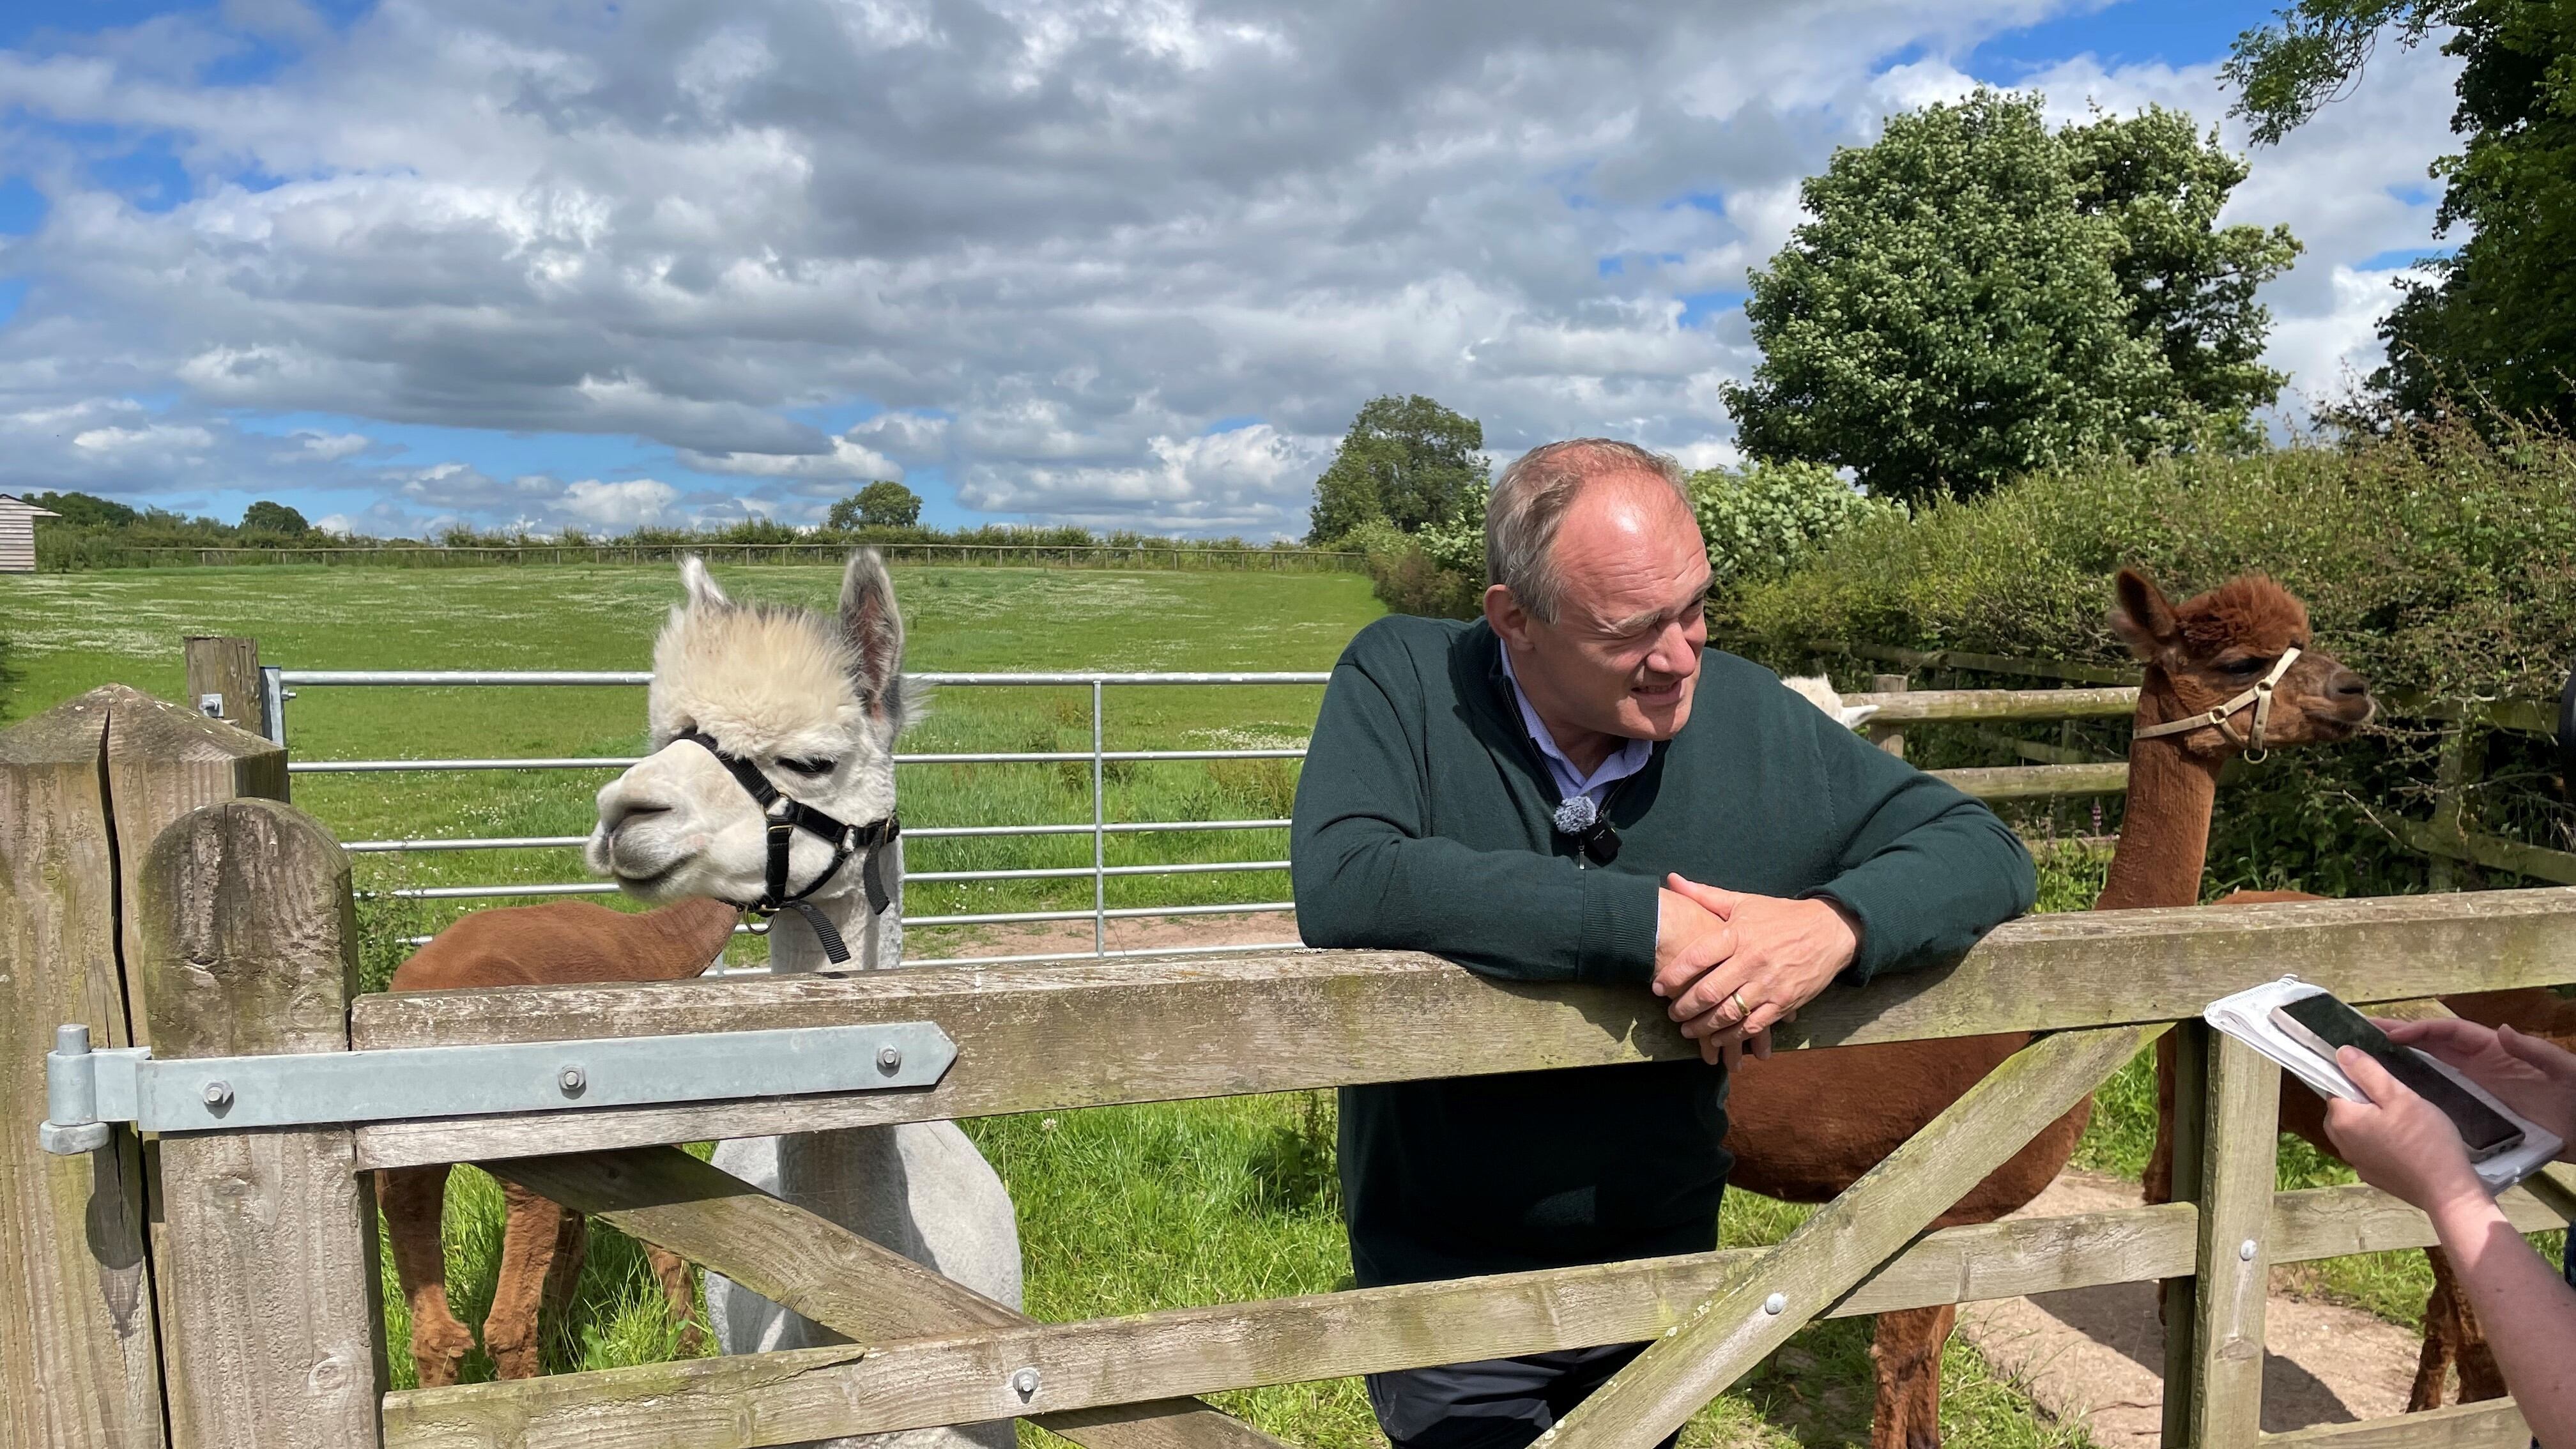 Lib Dem leader Sir Ed Davey has visited 37 Tory-held seats since the election campaign began, including meeting an alpaca at a farm in North Shropshire